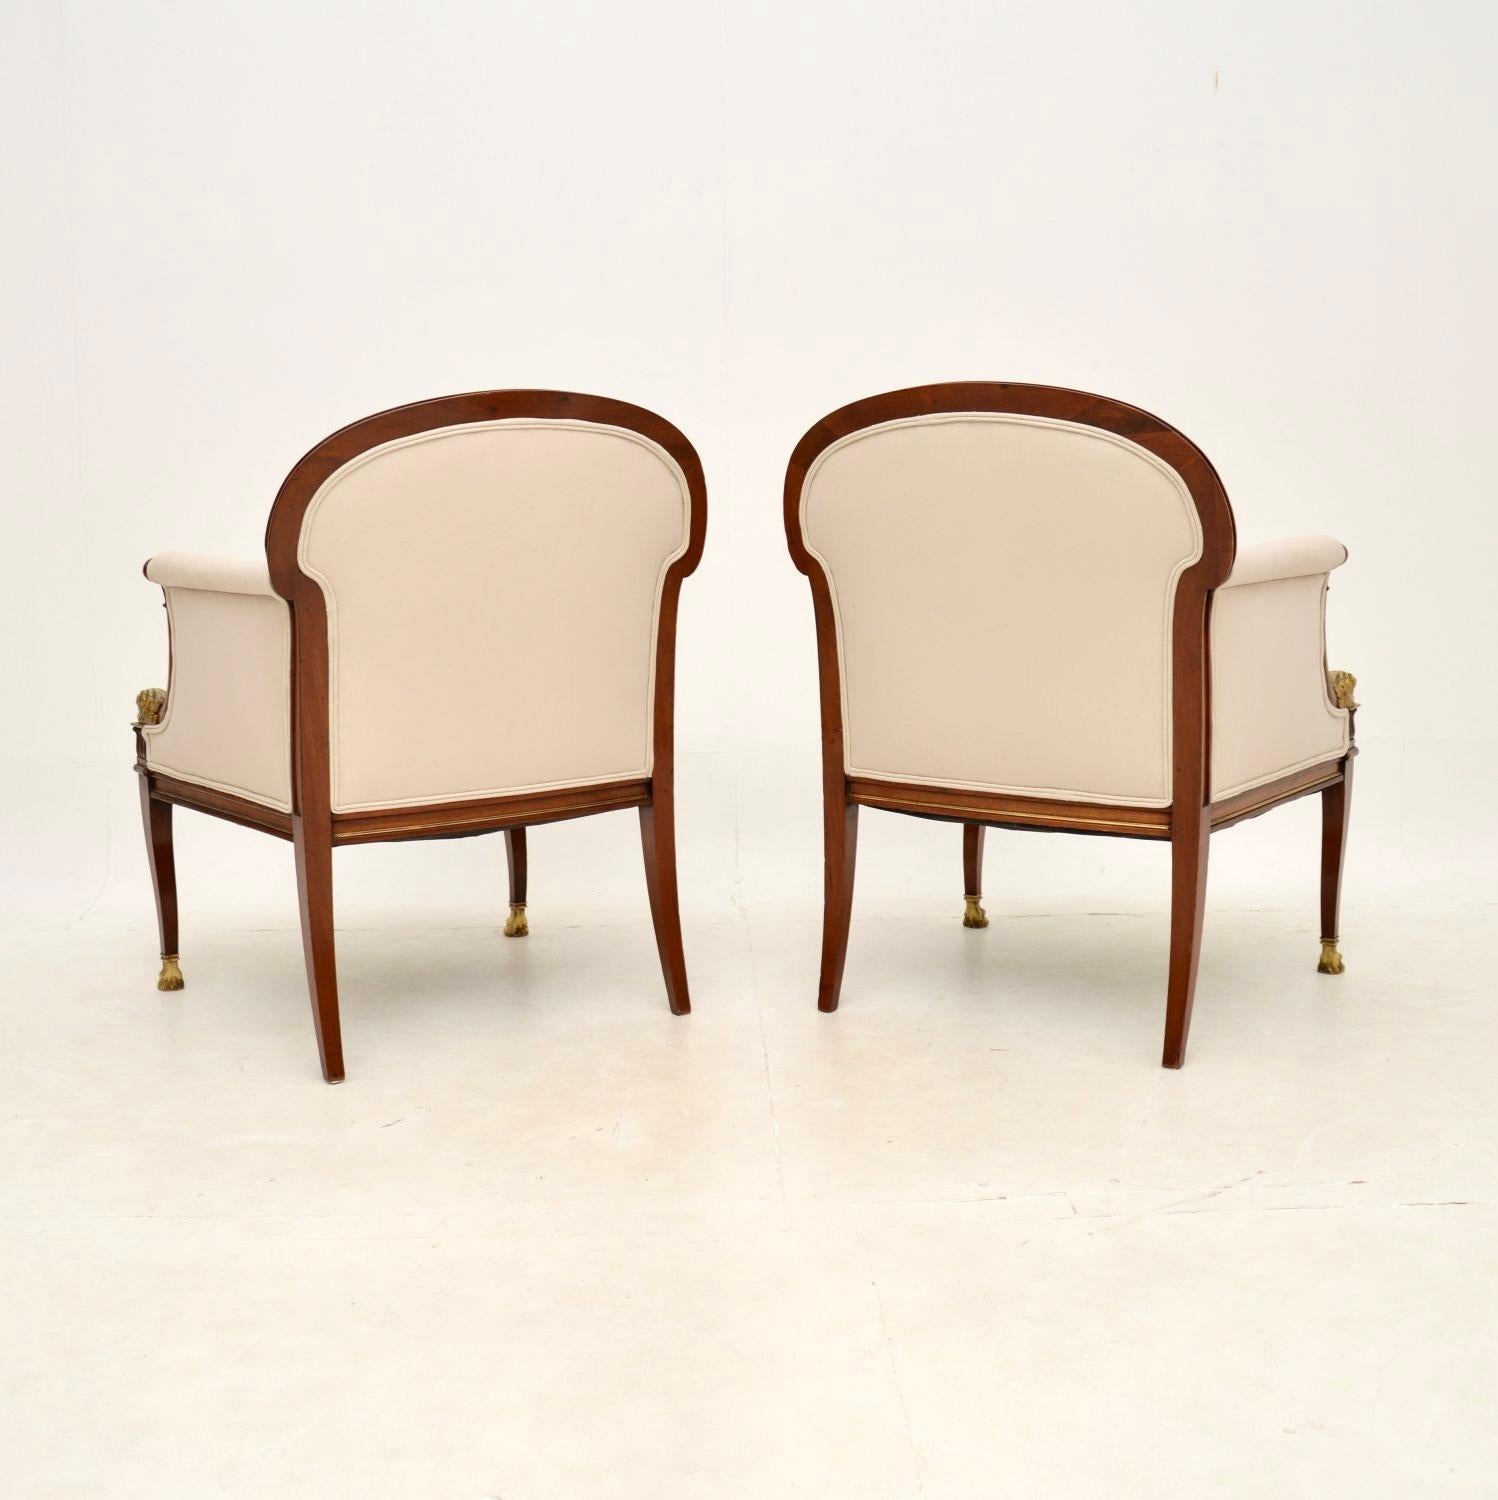 Swedish Pair of Antique Regency Style Armchairs